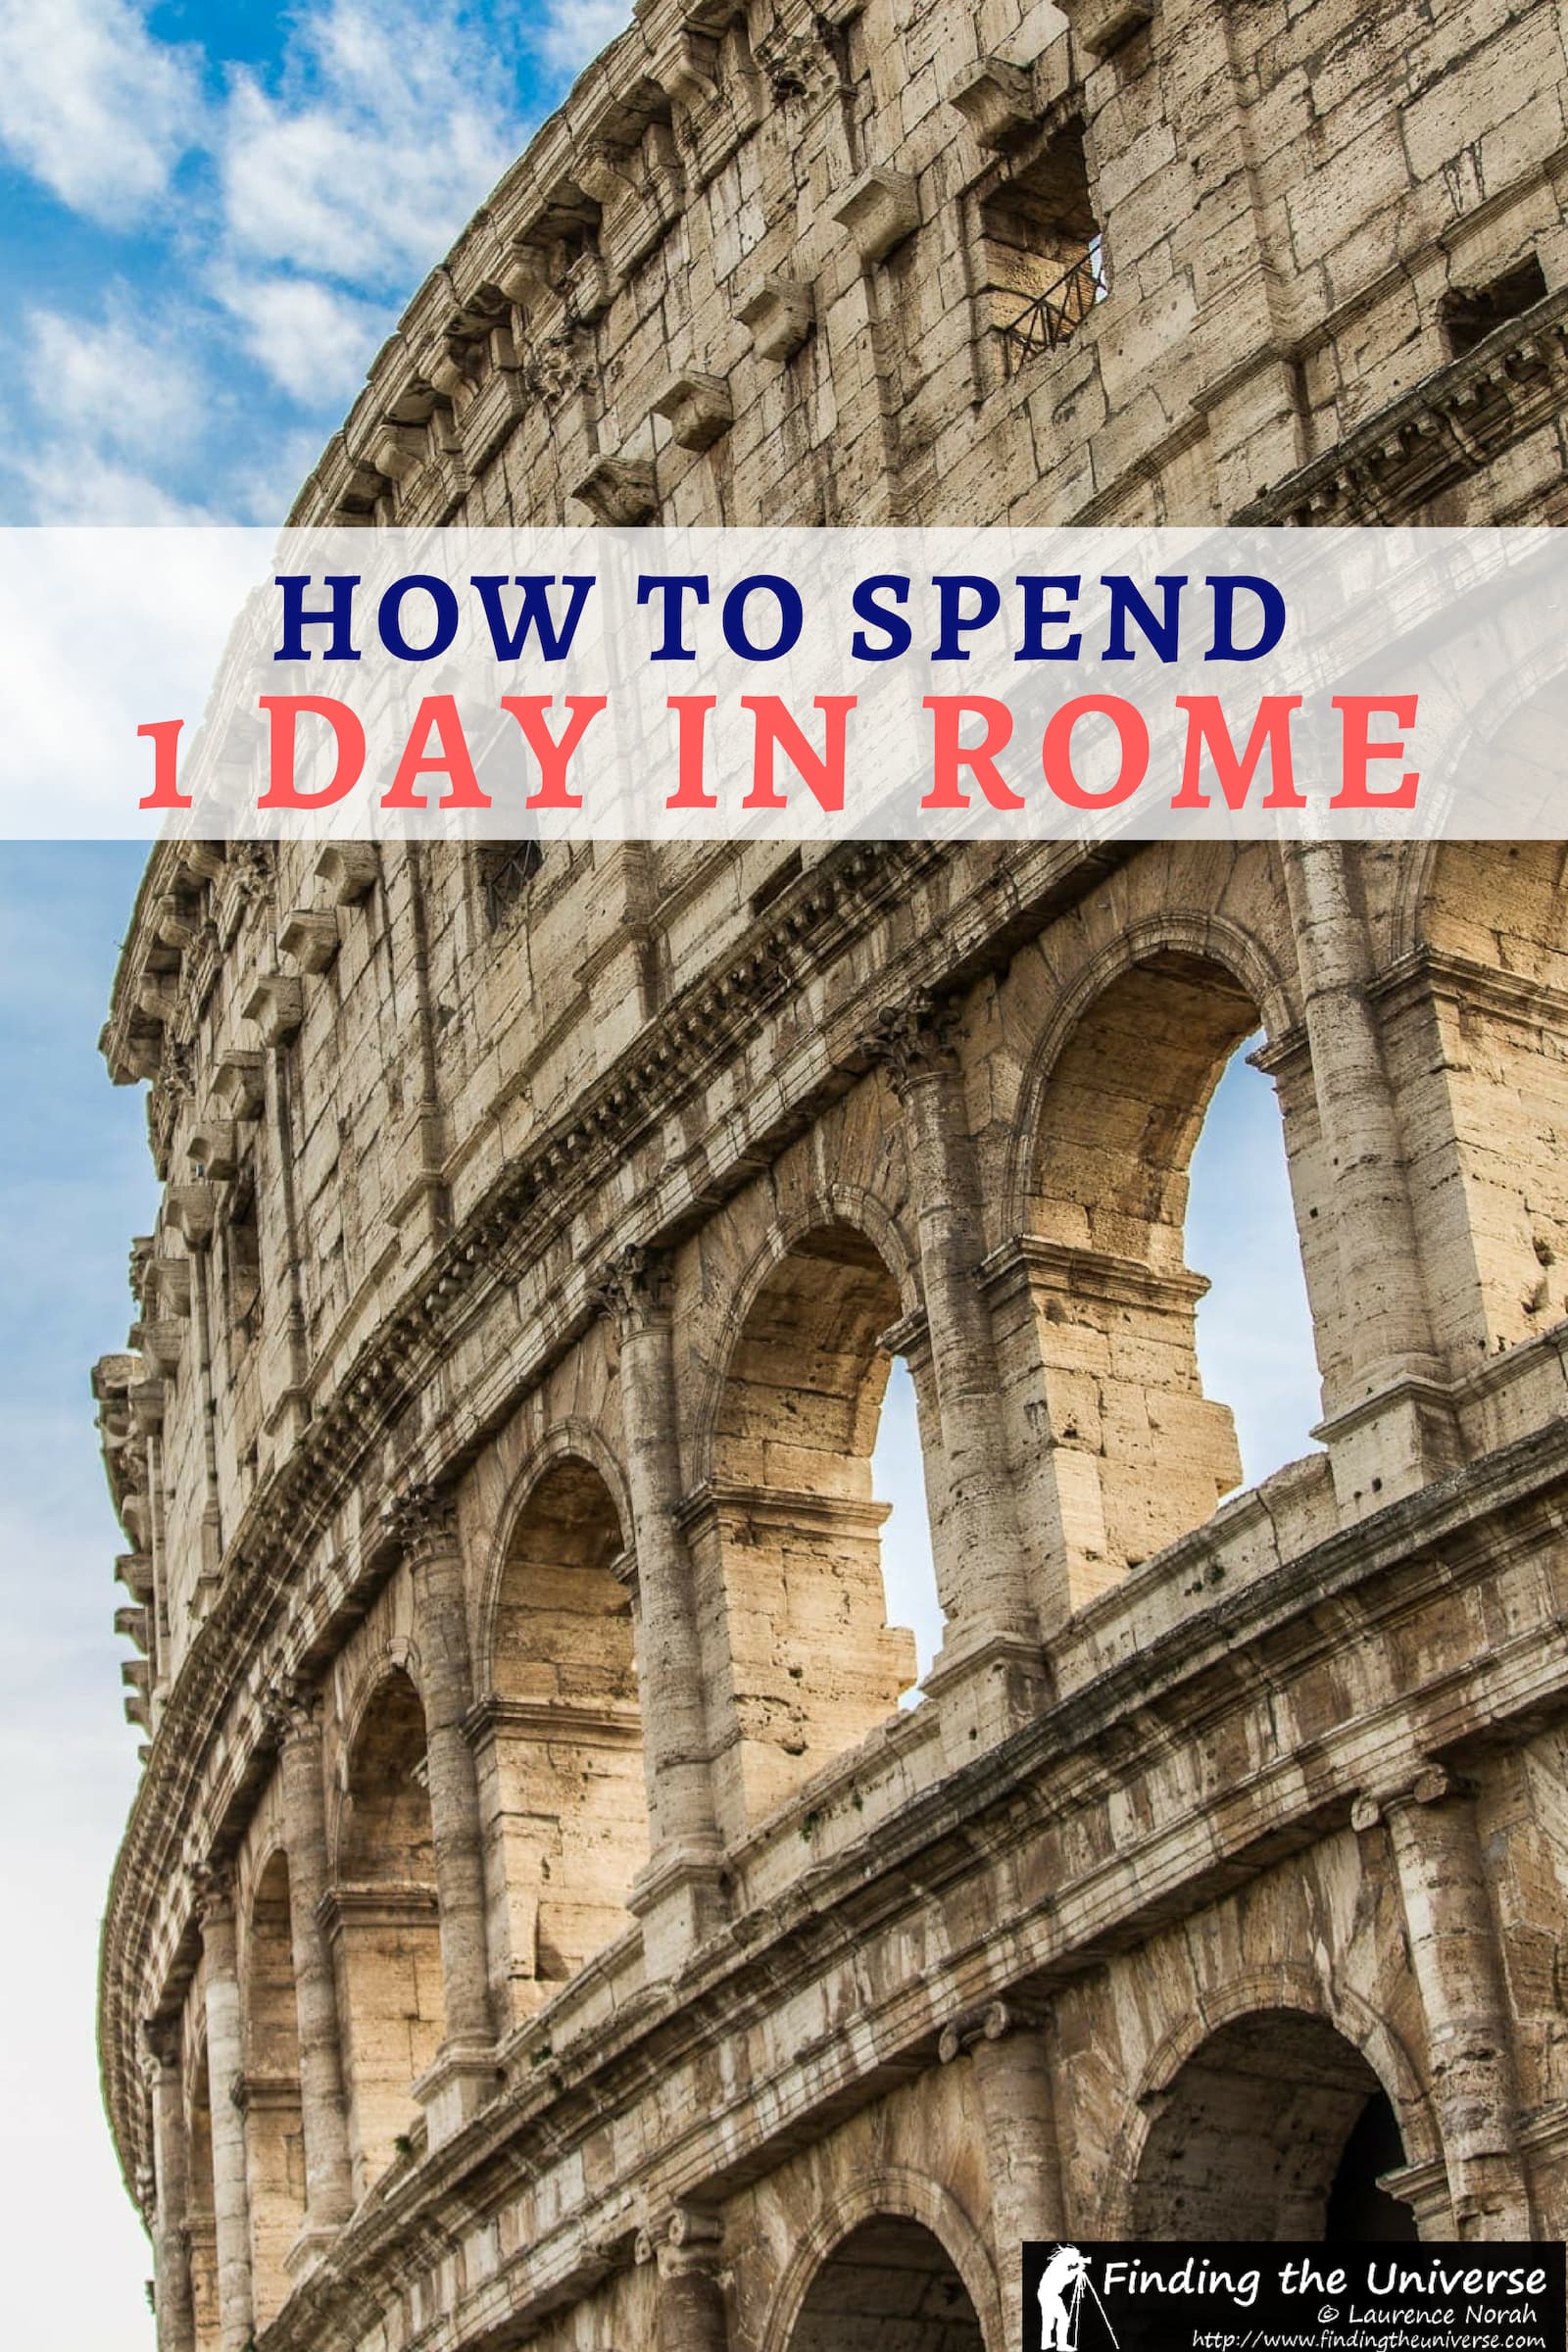 A detailed guide to spending a day in Rome, including a step by step itinerary, tips on getting around, suggested tours, and money saving tips!